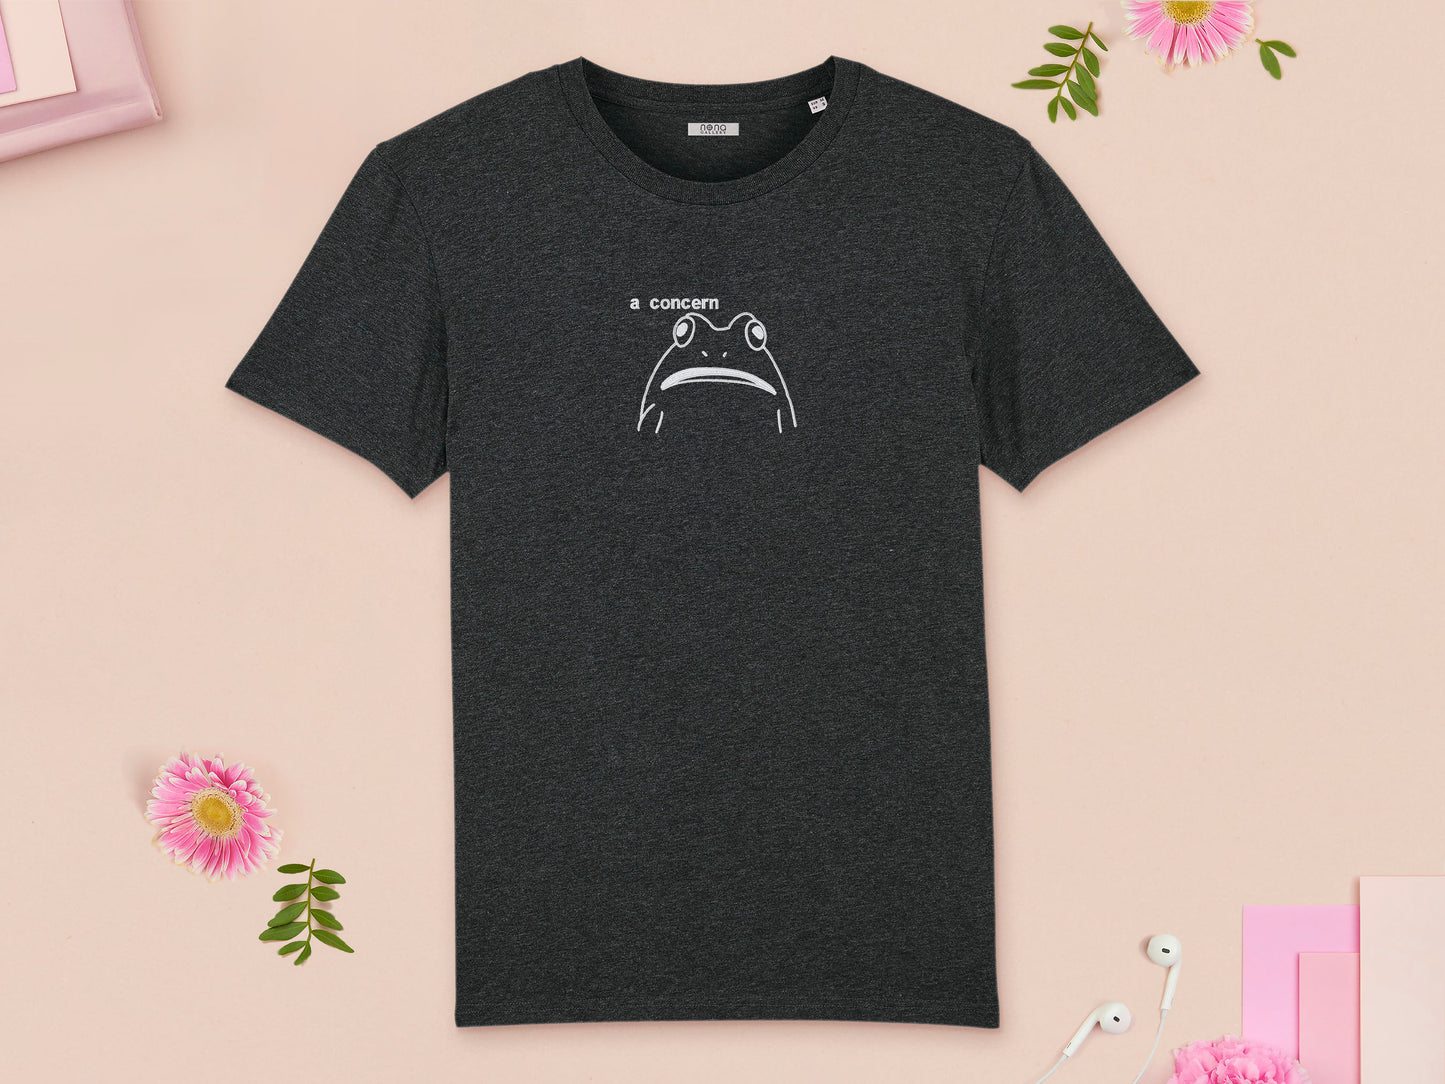 A grey  crew neck short sleeve t-shirt, with an embroidered white thread design of cute confused looking frog with the text a concern.